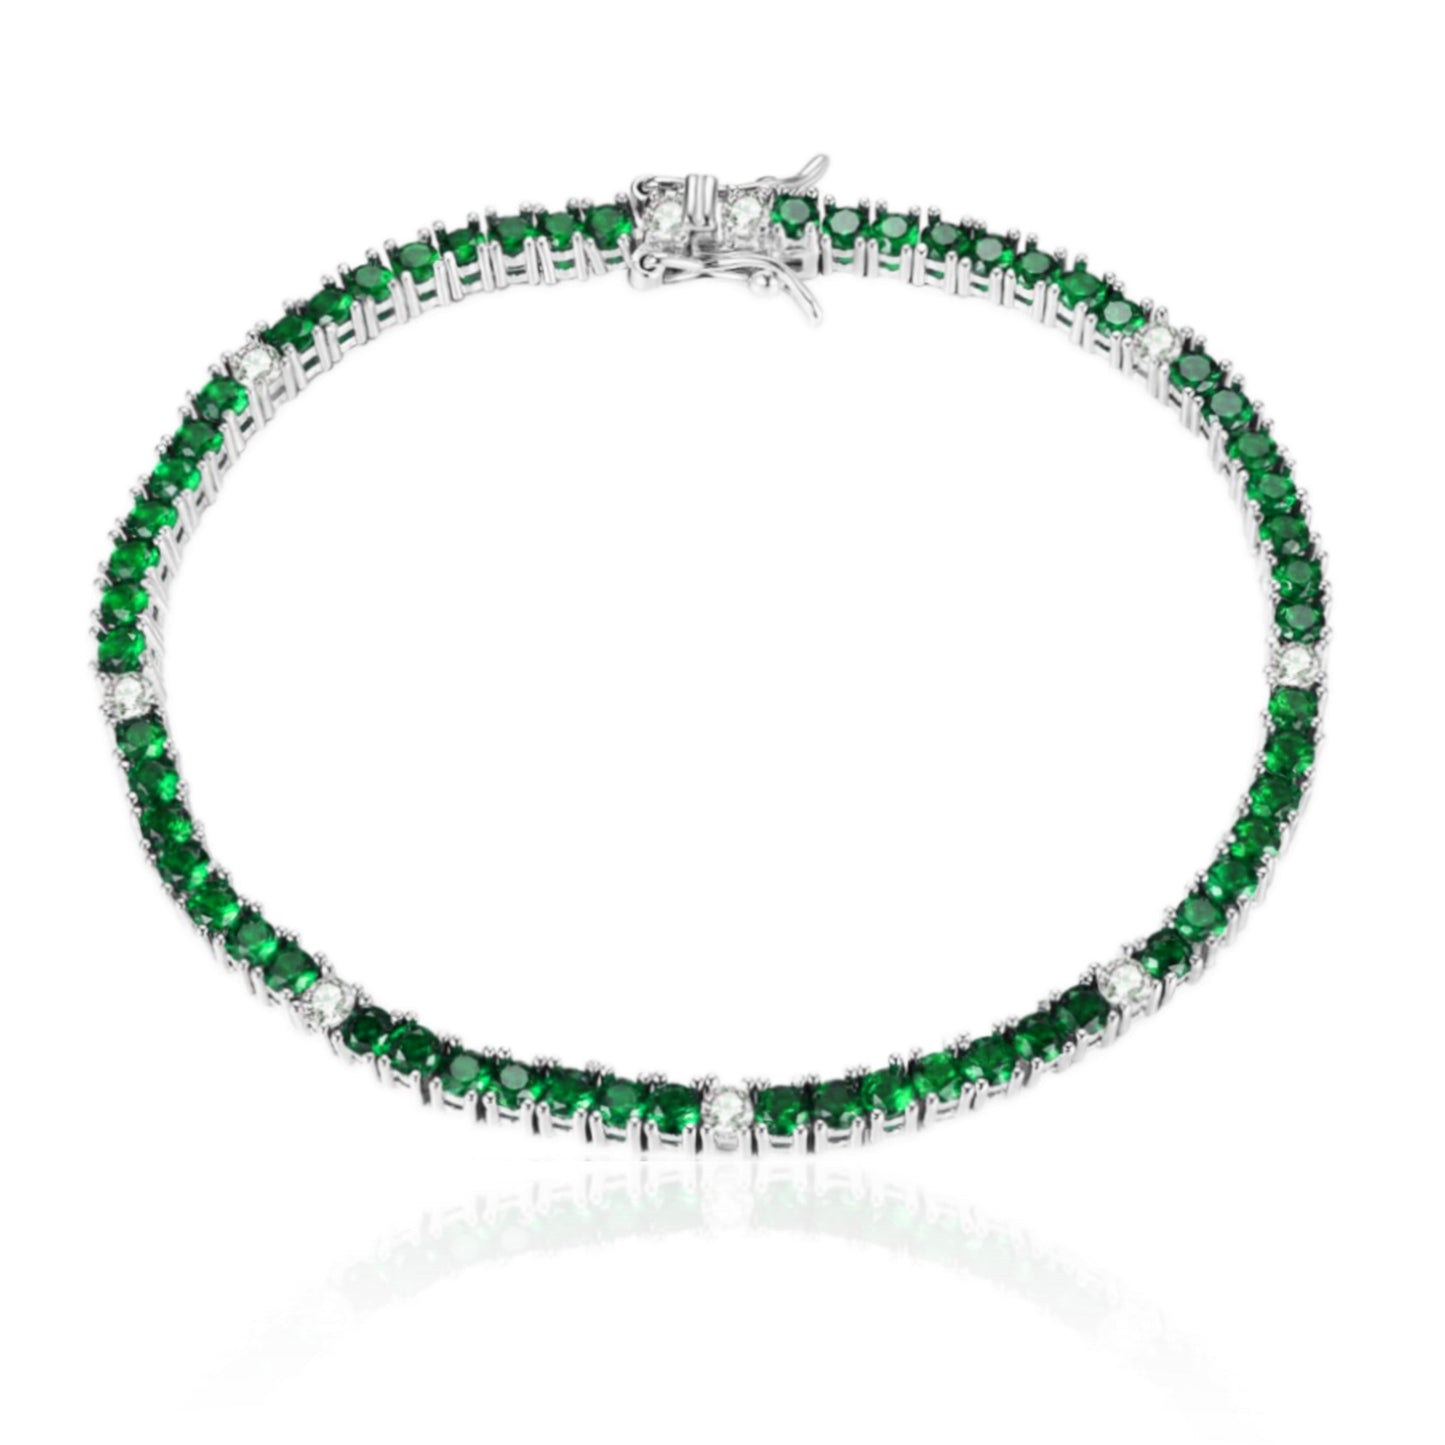 Sterling Silver Ruby, Emerald, and Sapphire Colored CZ Stone Bracelets - HK Jewels